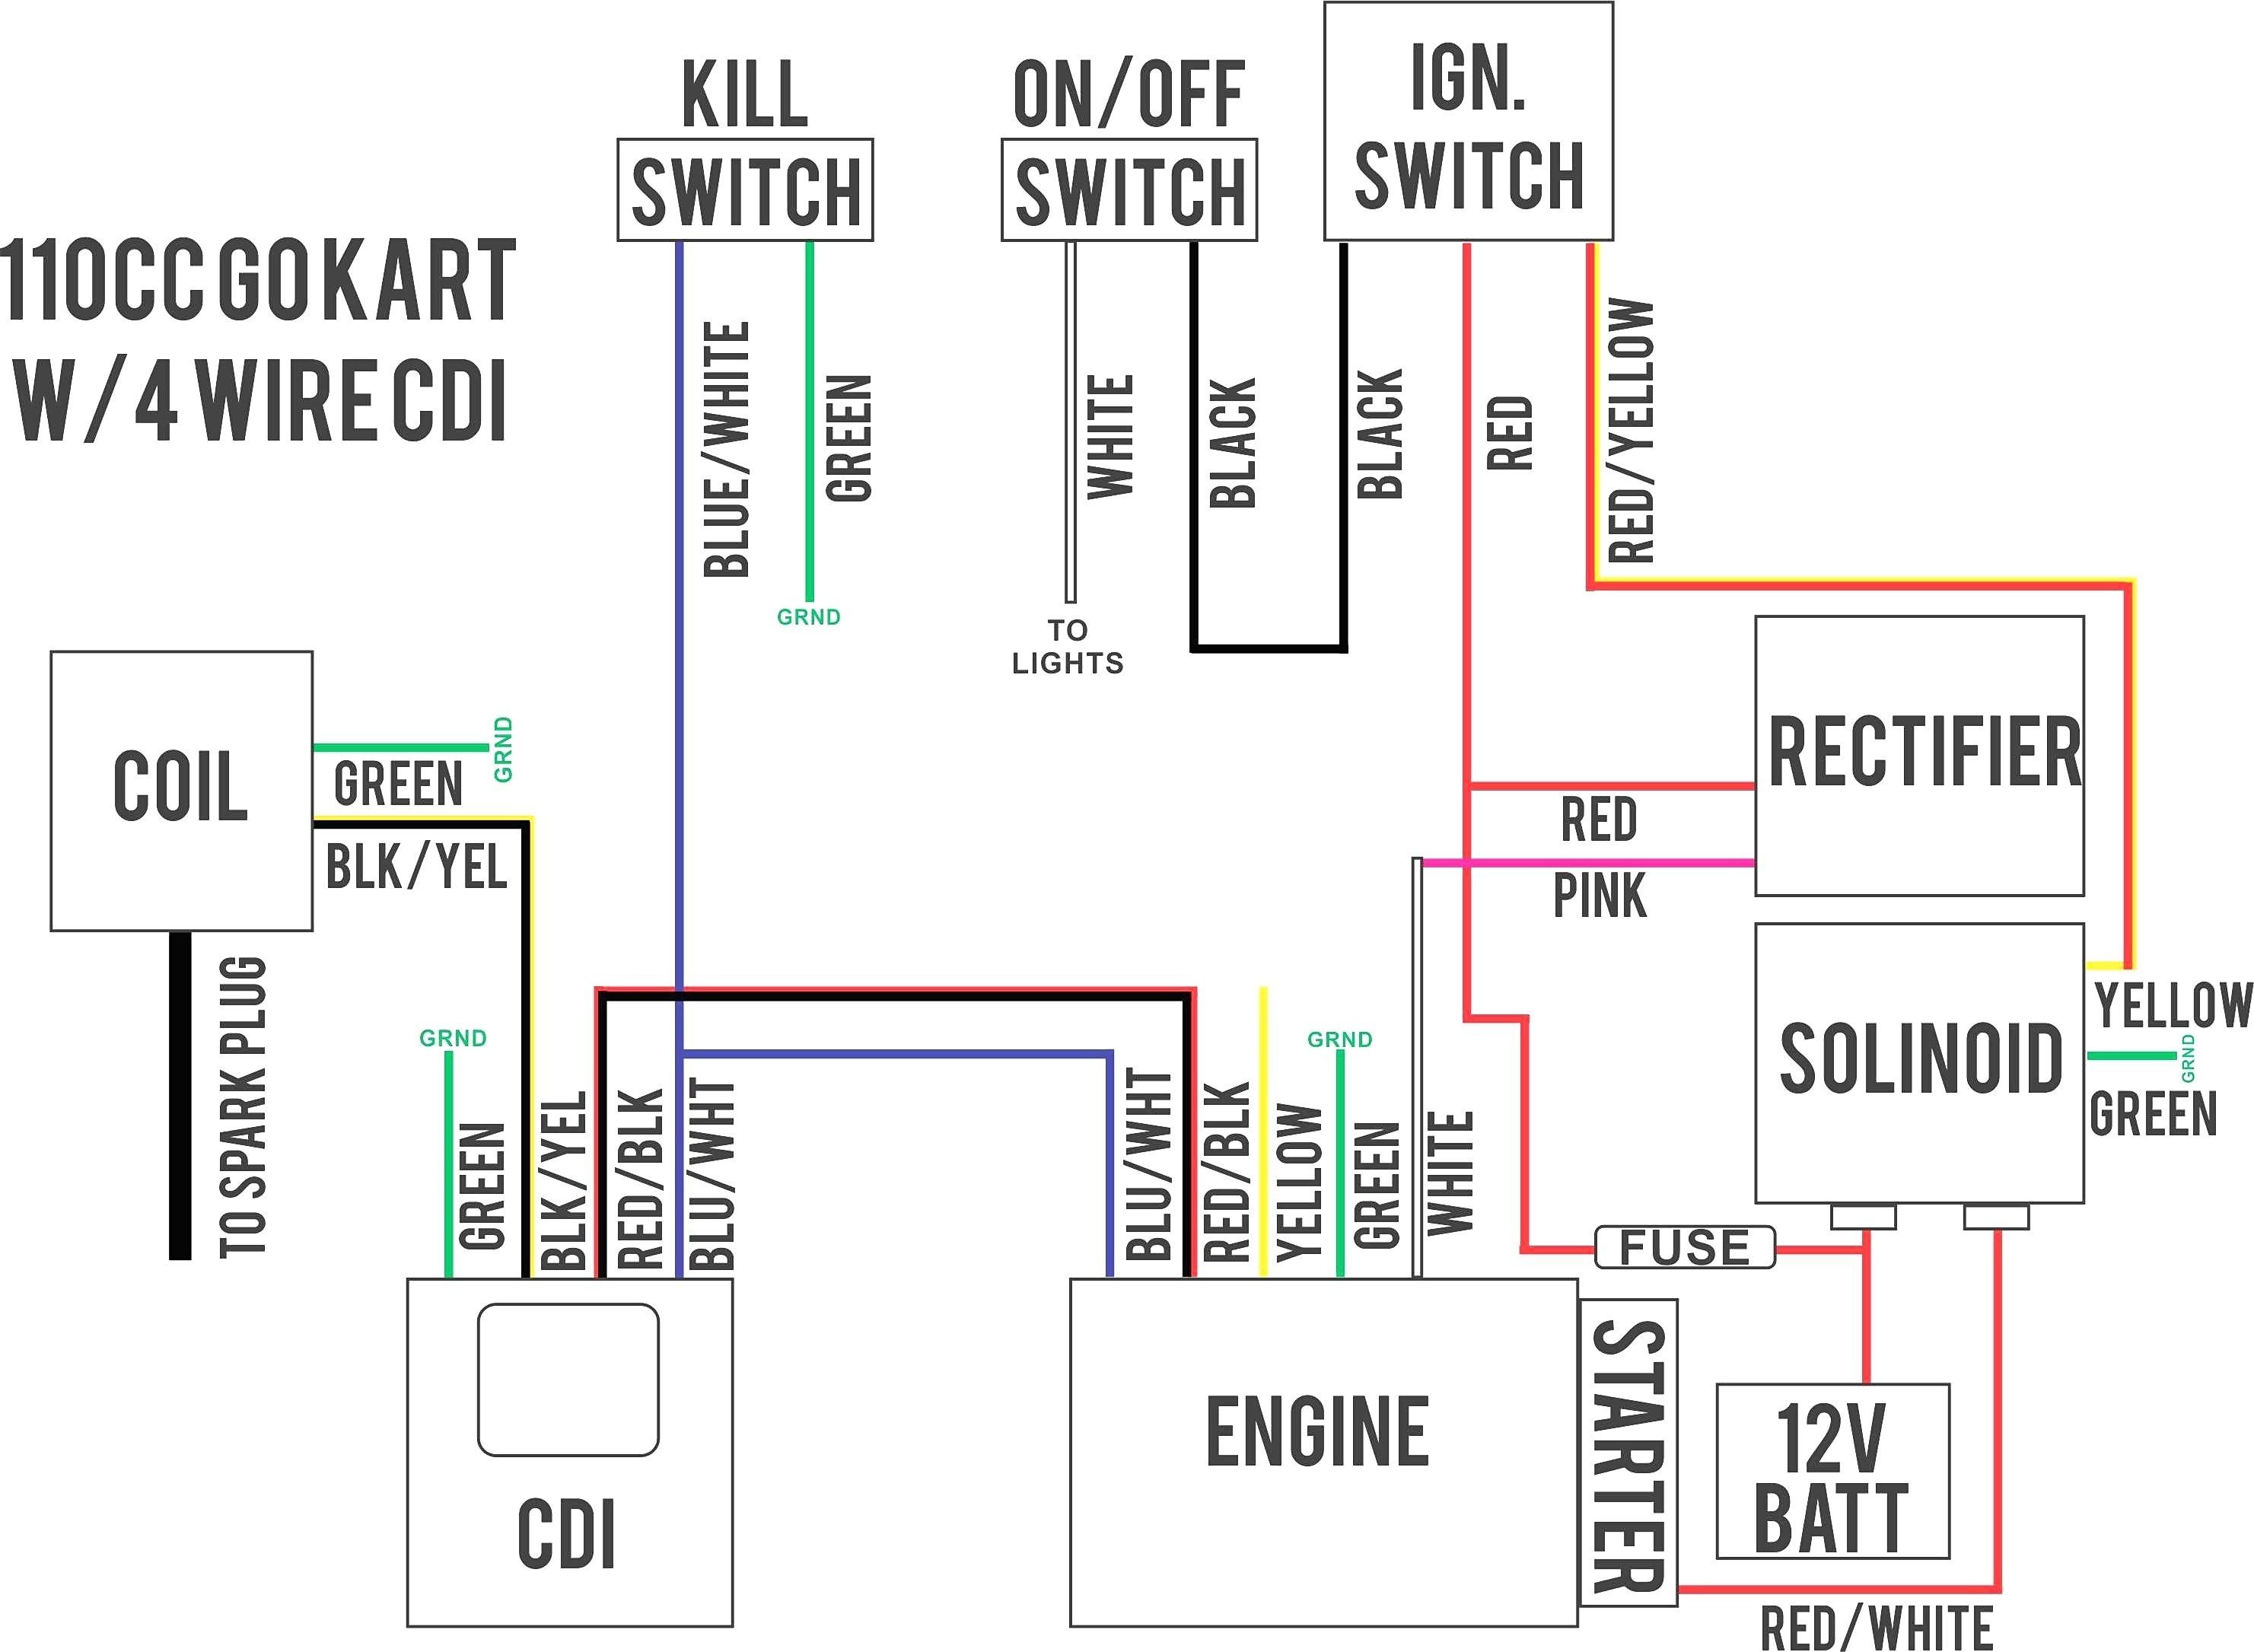 How to Wire Hazard Flasher Electrical Wiring Diagram Motorcycle Bookingritzcarlton Of How to Wire Hazard Flasher